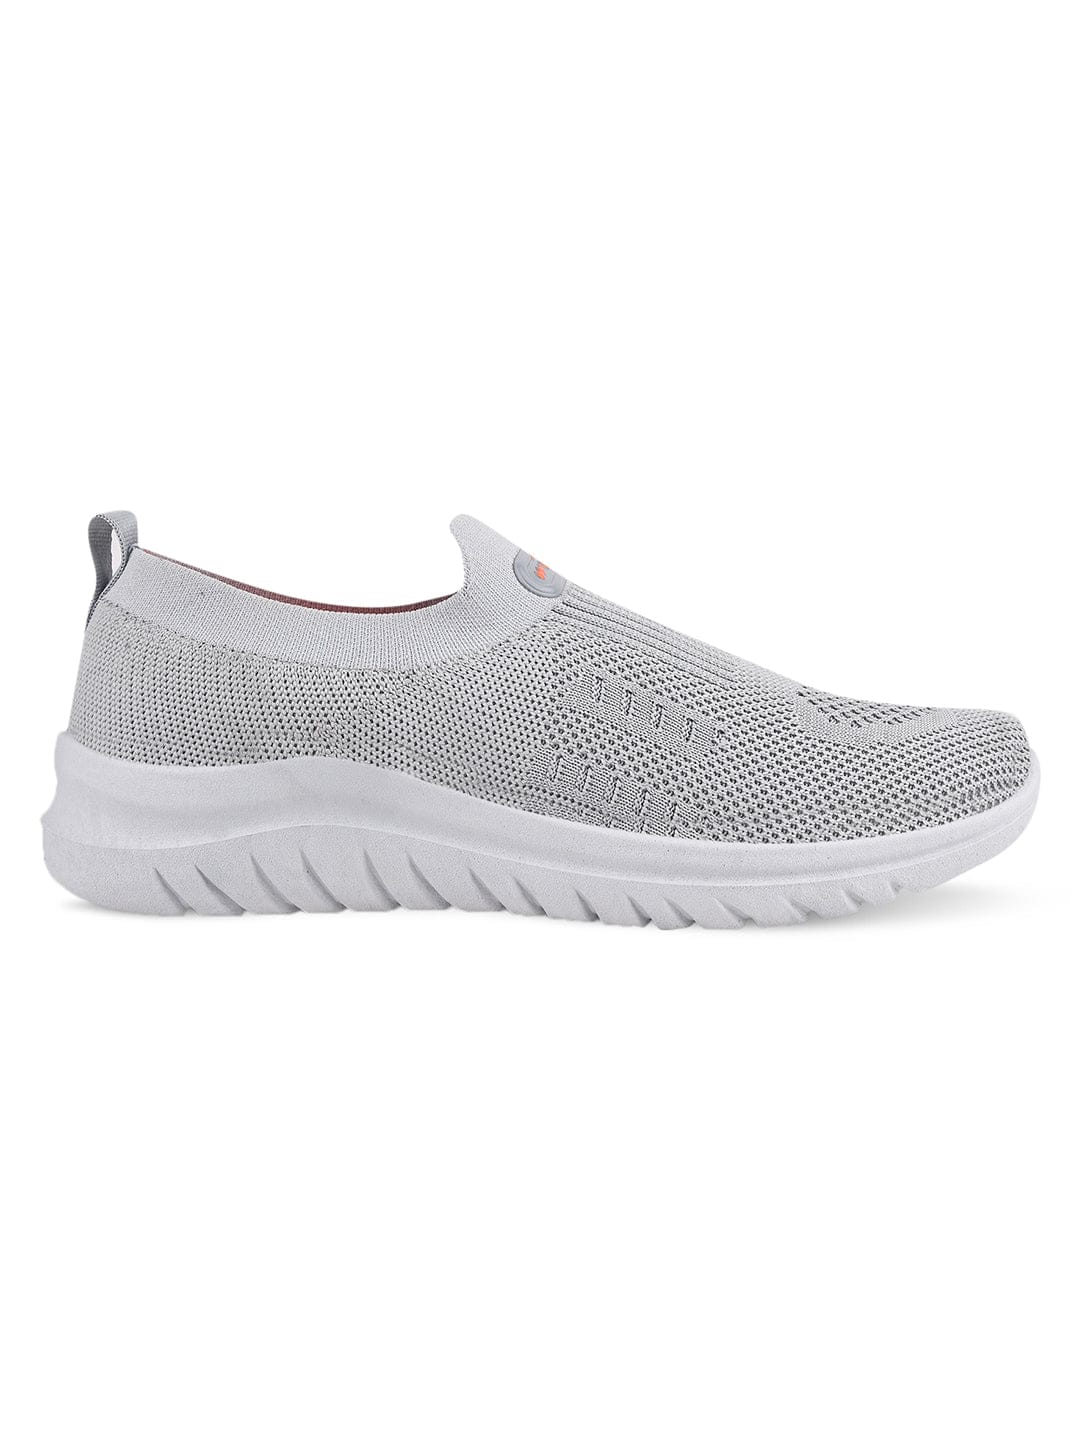 Buy LW-01 Grey Women Running Shoes online | Campus Shoes